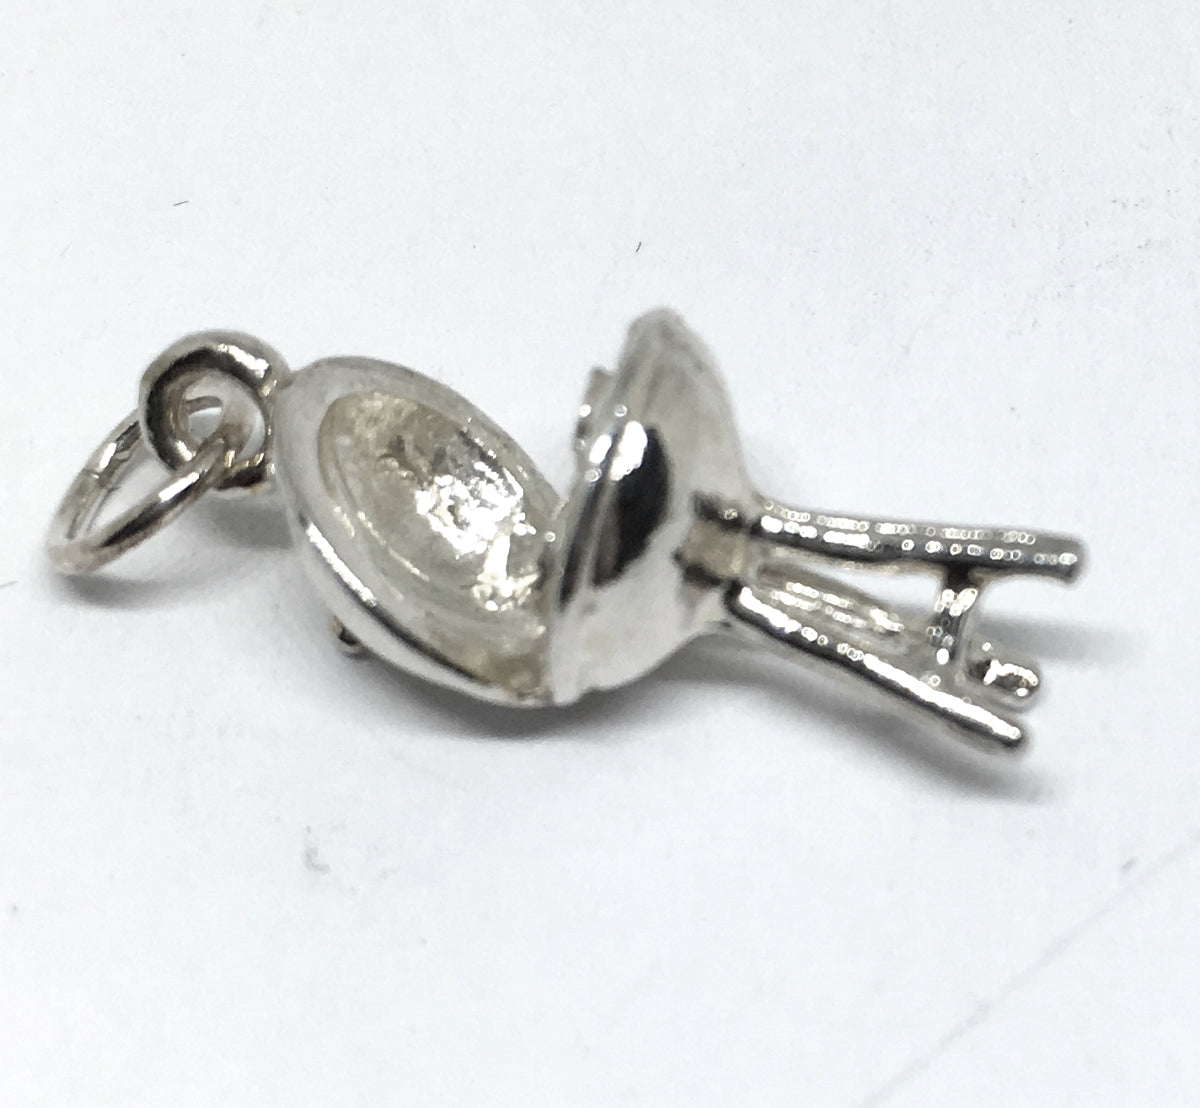 BBQ Grill Charm in Sterling Silver